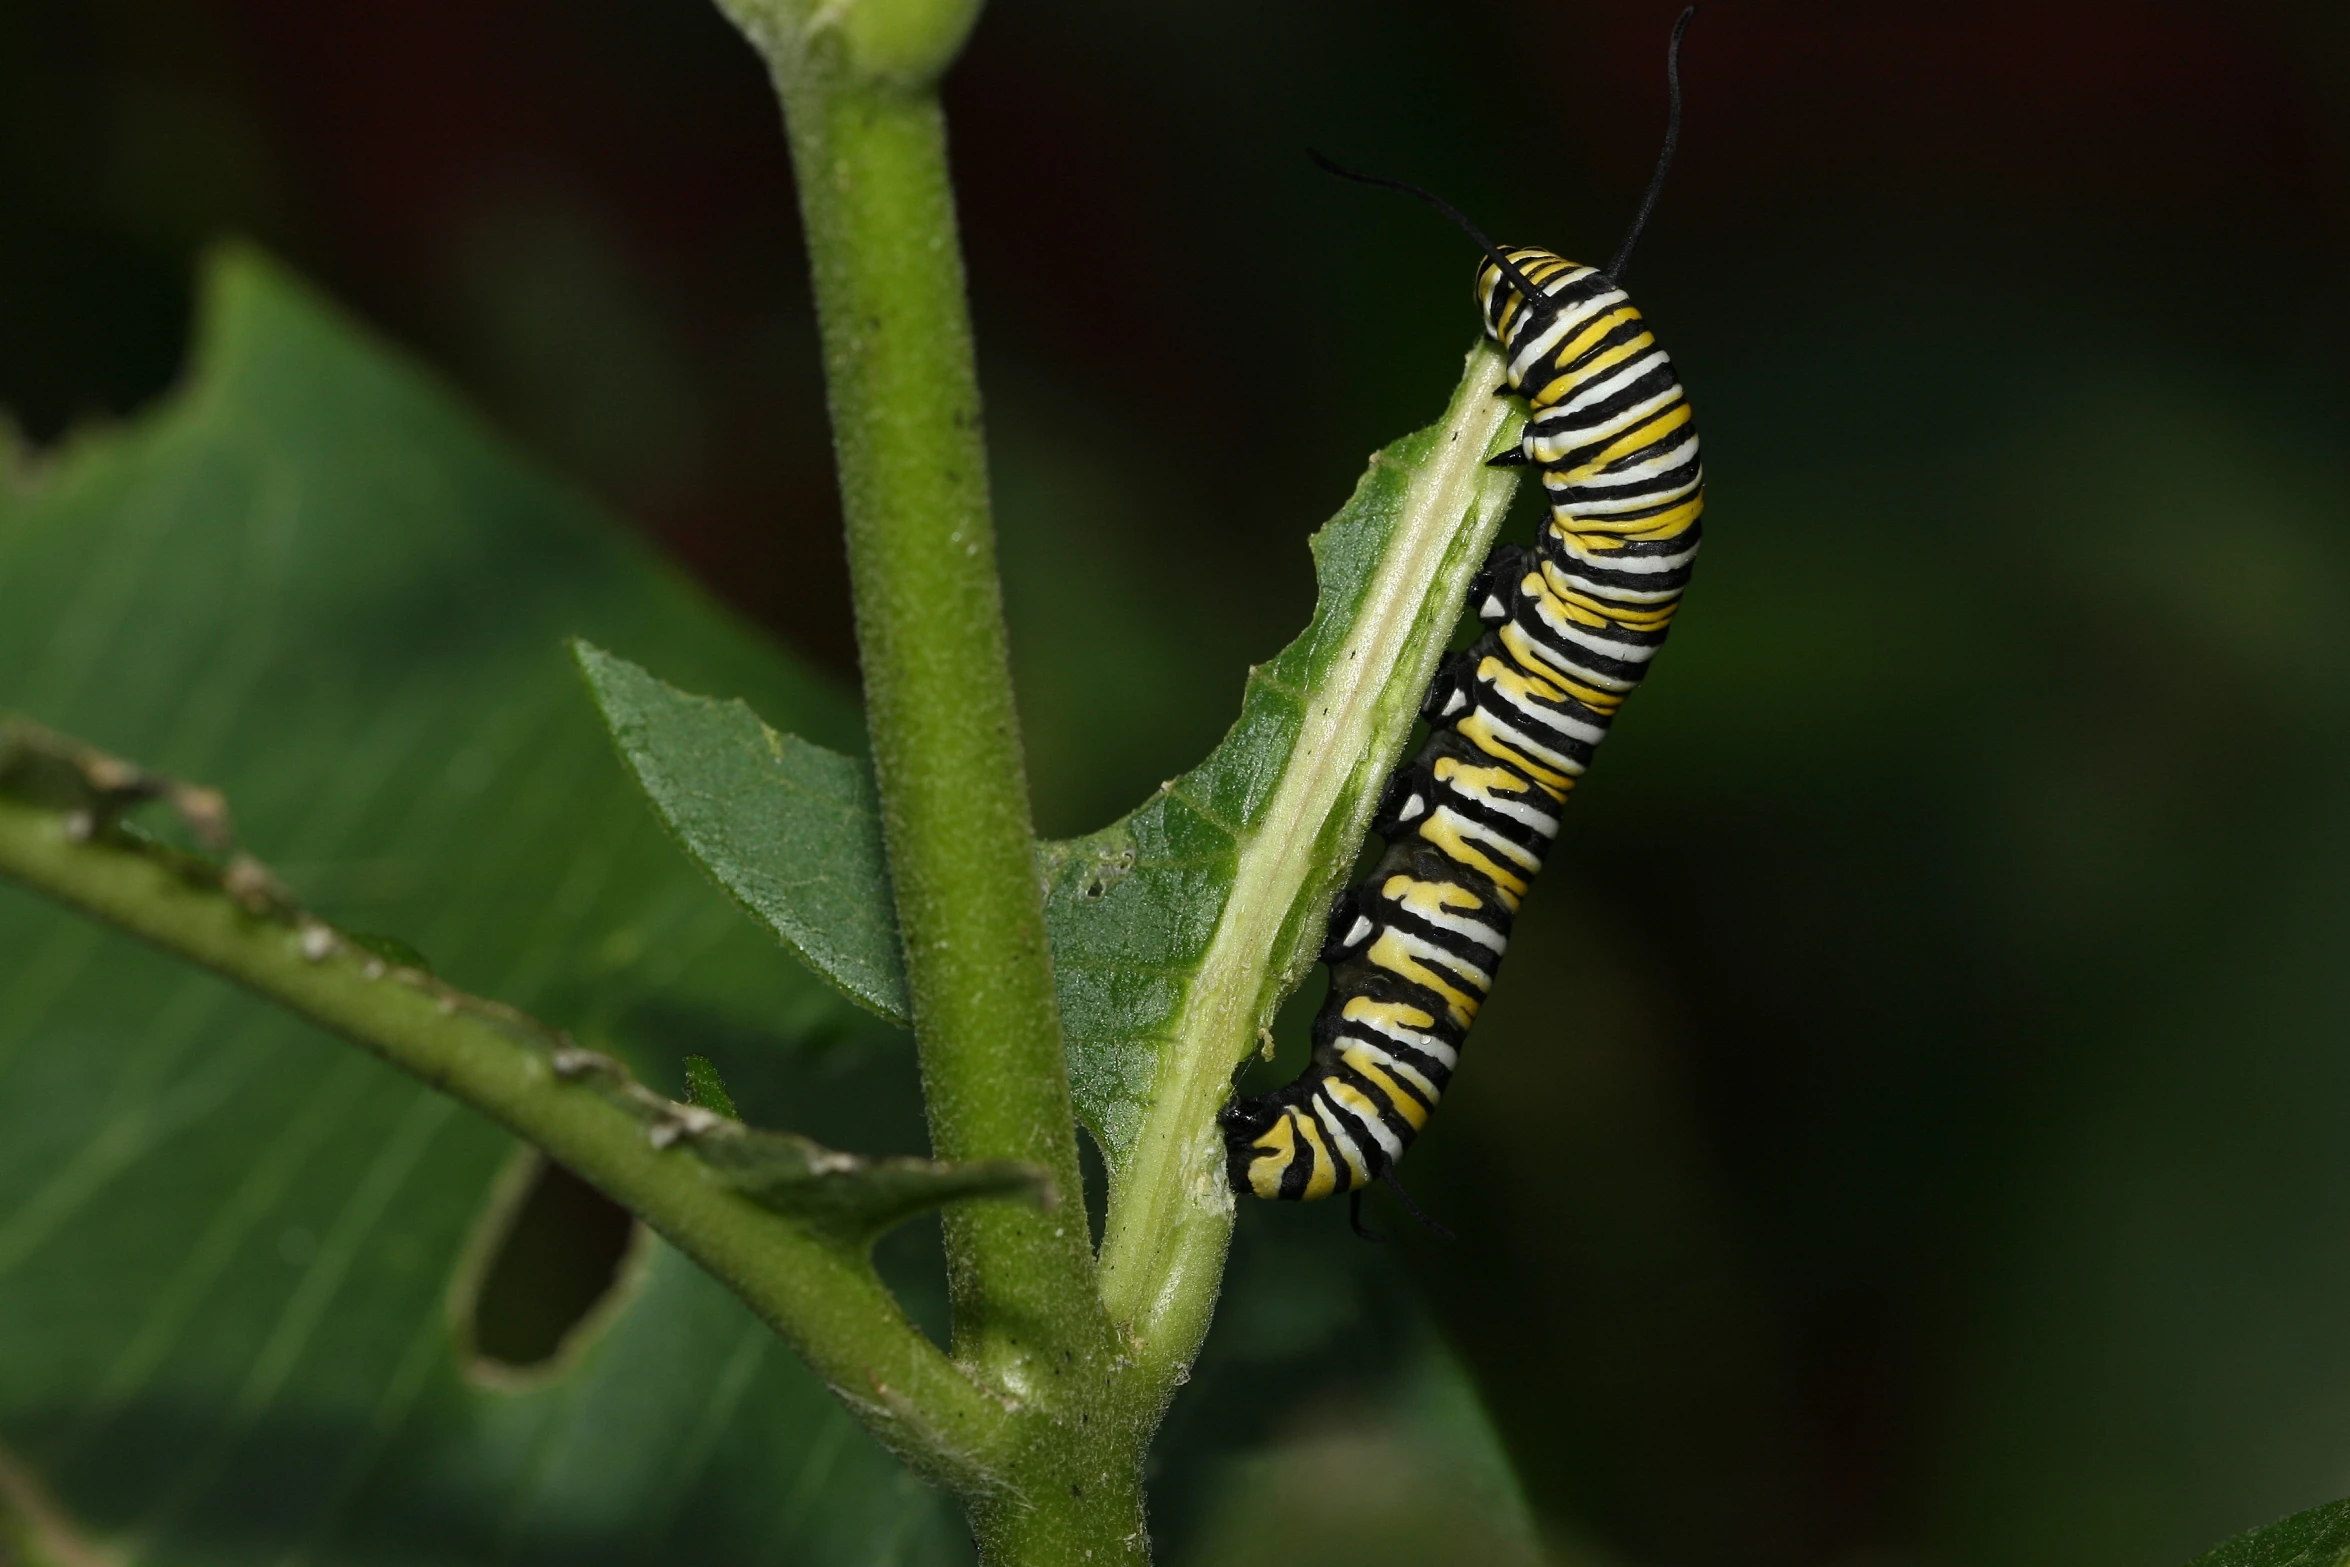 an adult caterpillar is on the stem of a plant